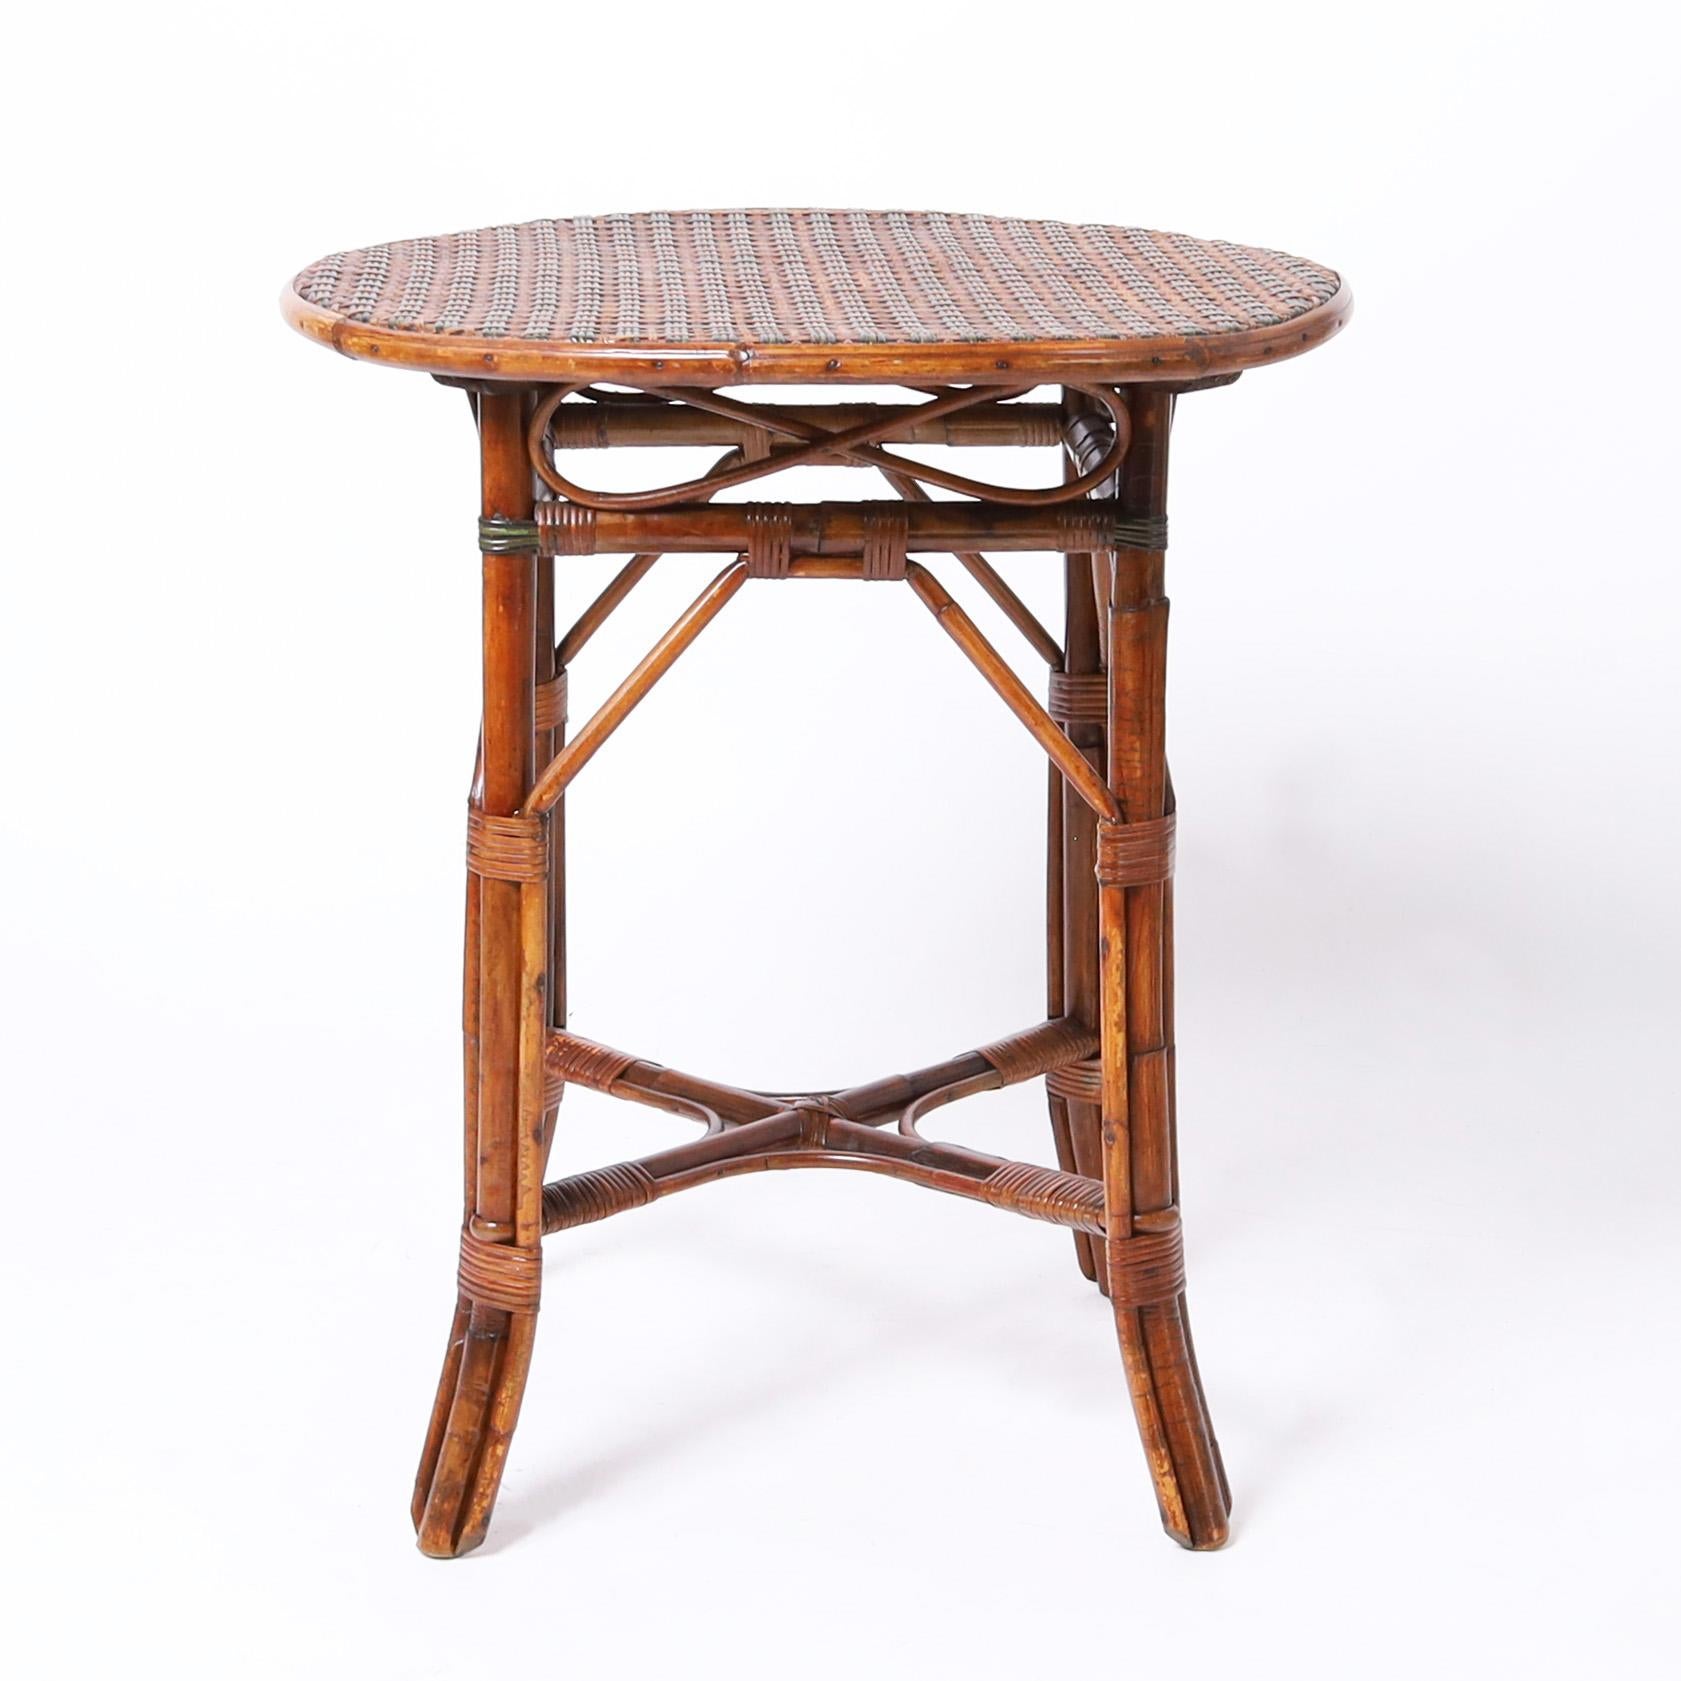 vintage french bistro table and chairs